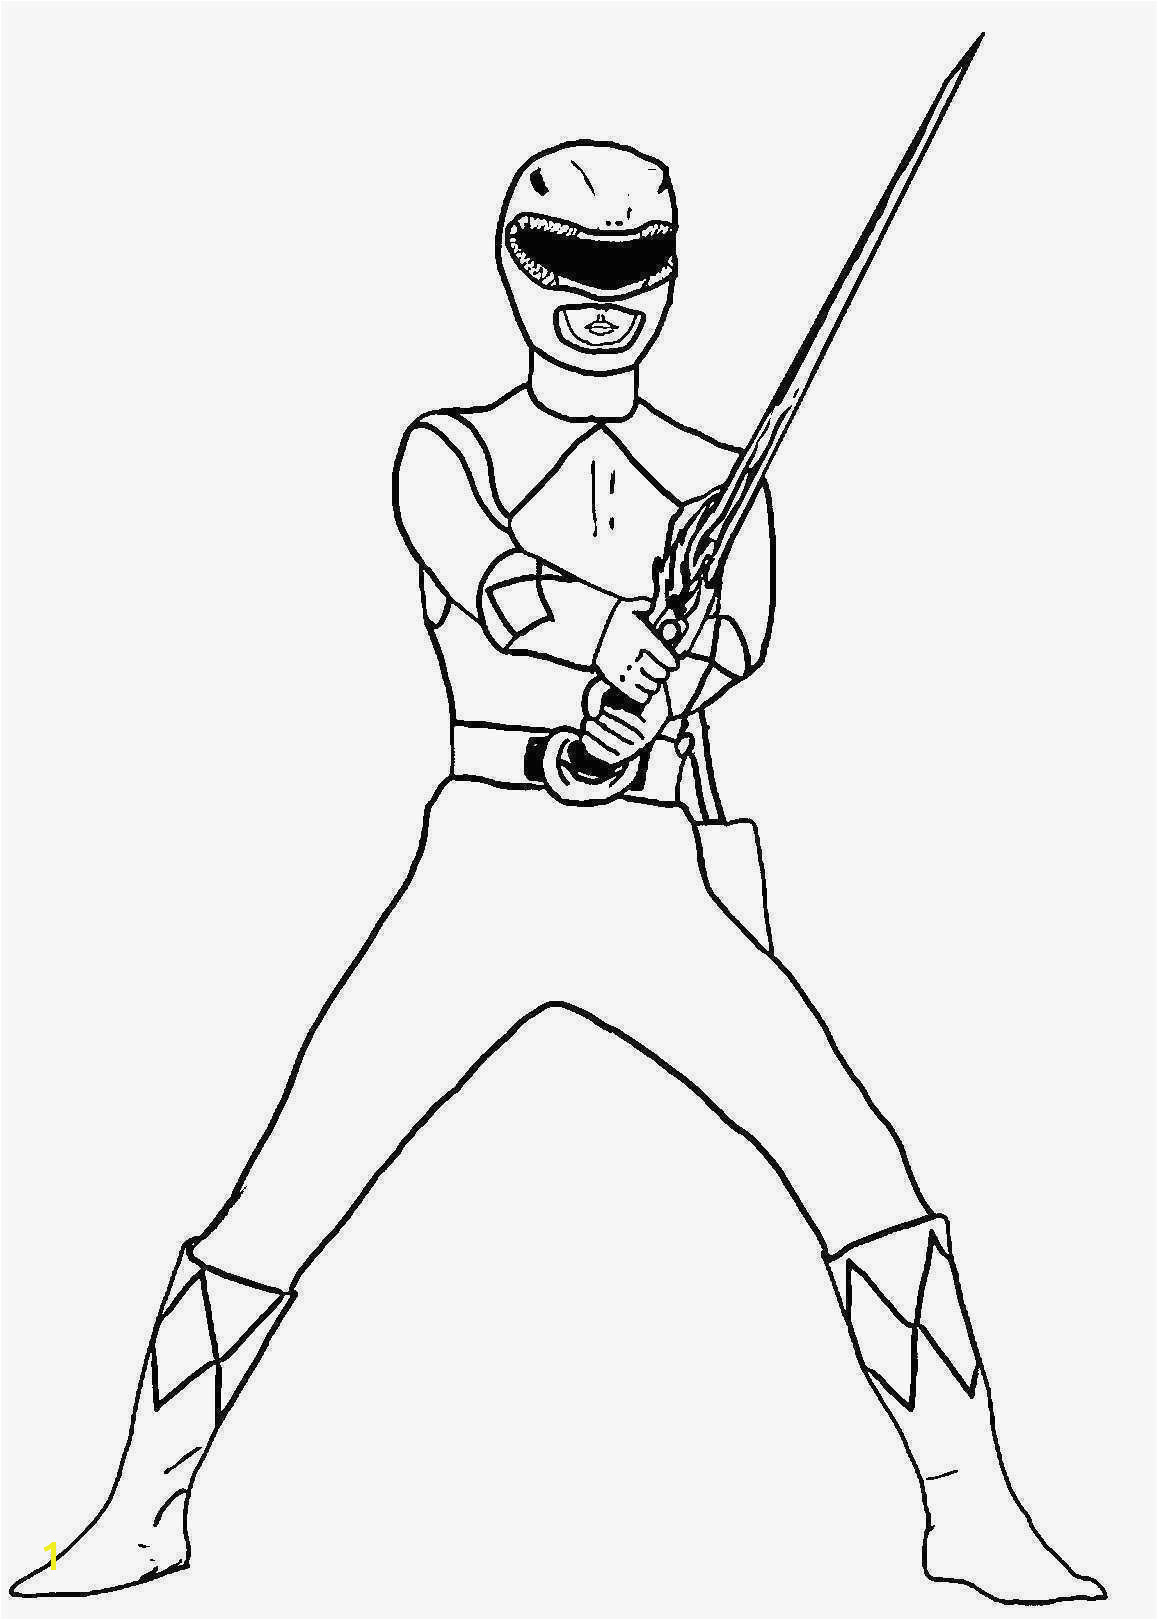 Power Ranger Coloring Pages to Print Mighty Morphin Power Ranger Coloring Pages